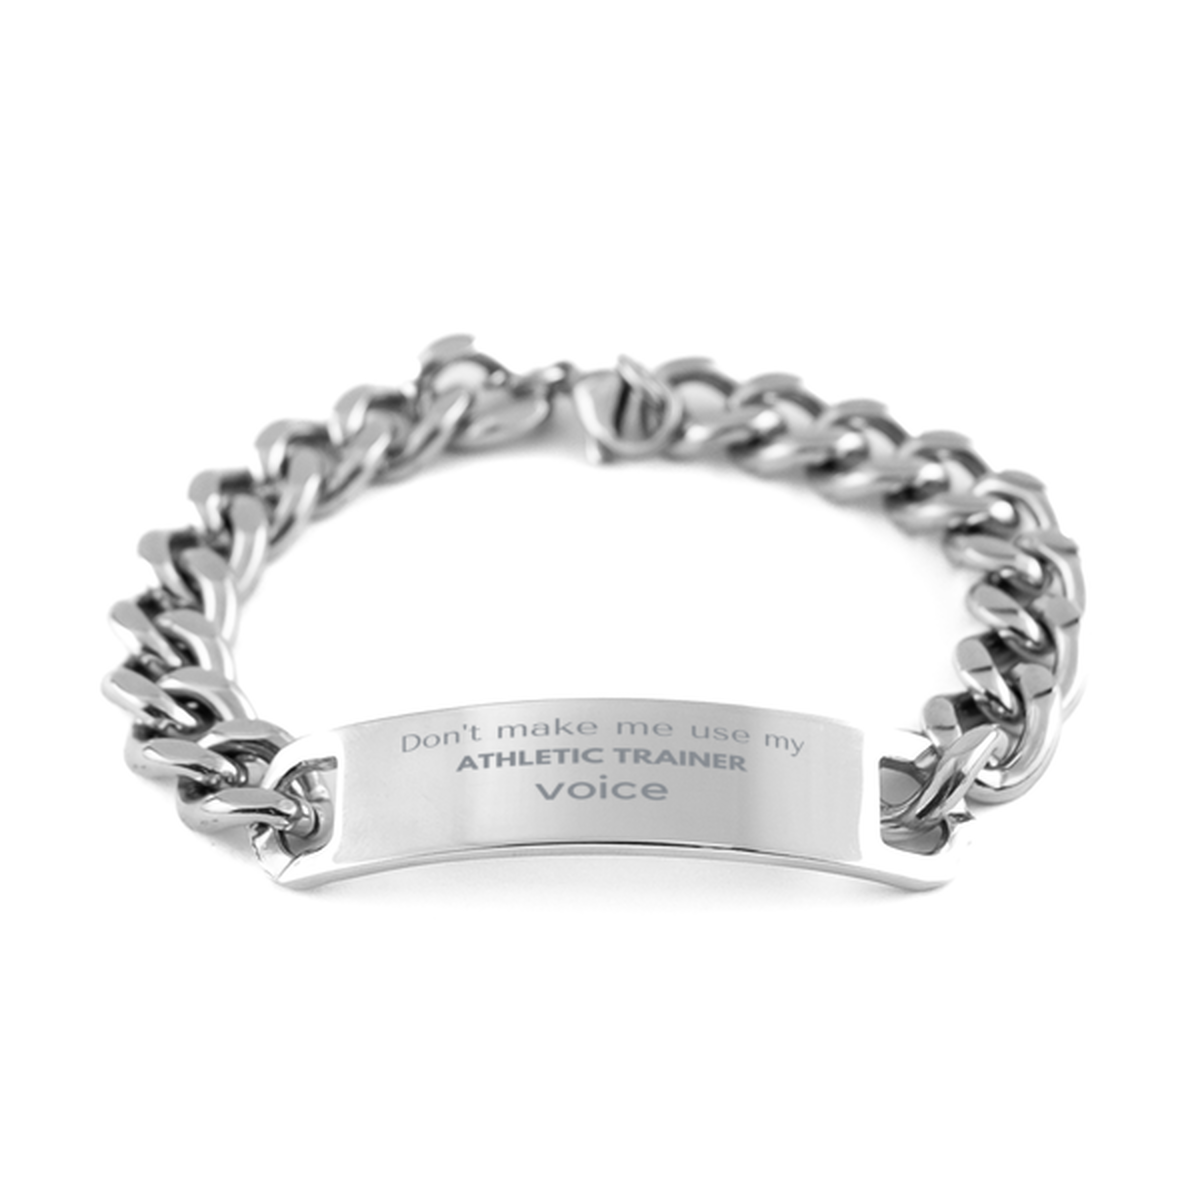 Don't make me use my Athletic Trainer voice, Sarcasm Athletic Trainer Gifts, Christmas Athletic Trainer Cuban Chain Stainless Steel Bracelet Birthday Unique Gifts For Athletic Trainer Coworkers, Men, Women, Colleague, Friends